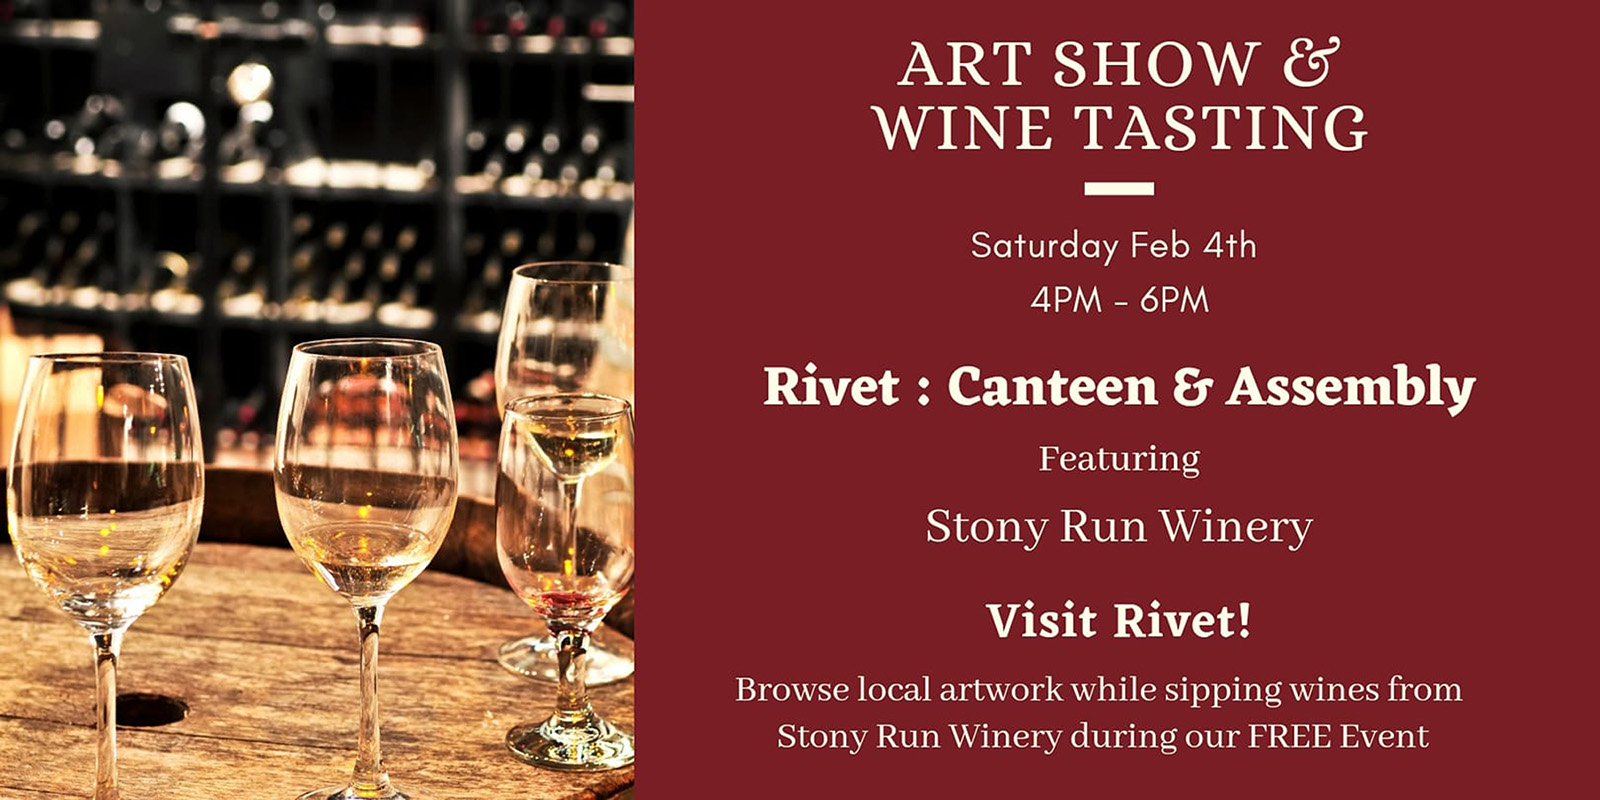 Art Show & Wine Tasting at Rivet: Canteen & Assembly with Stony Run Winery on Saturday, February 4th, 2023. Entry is free!